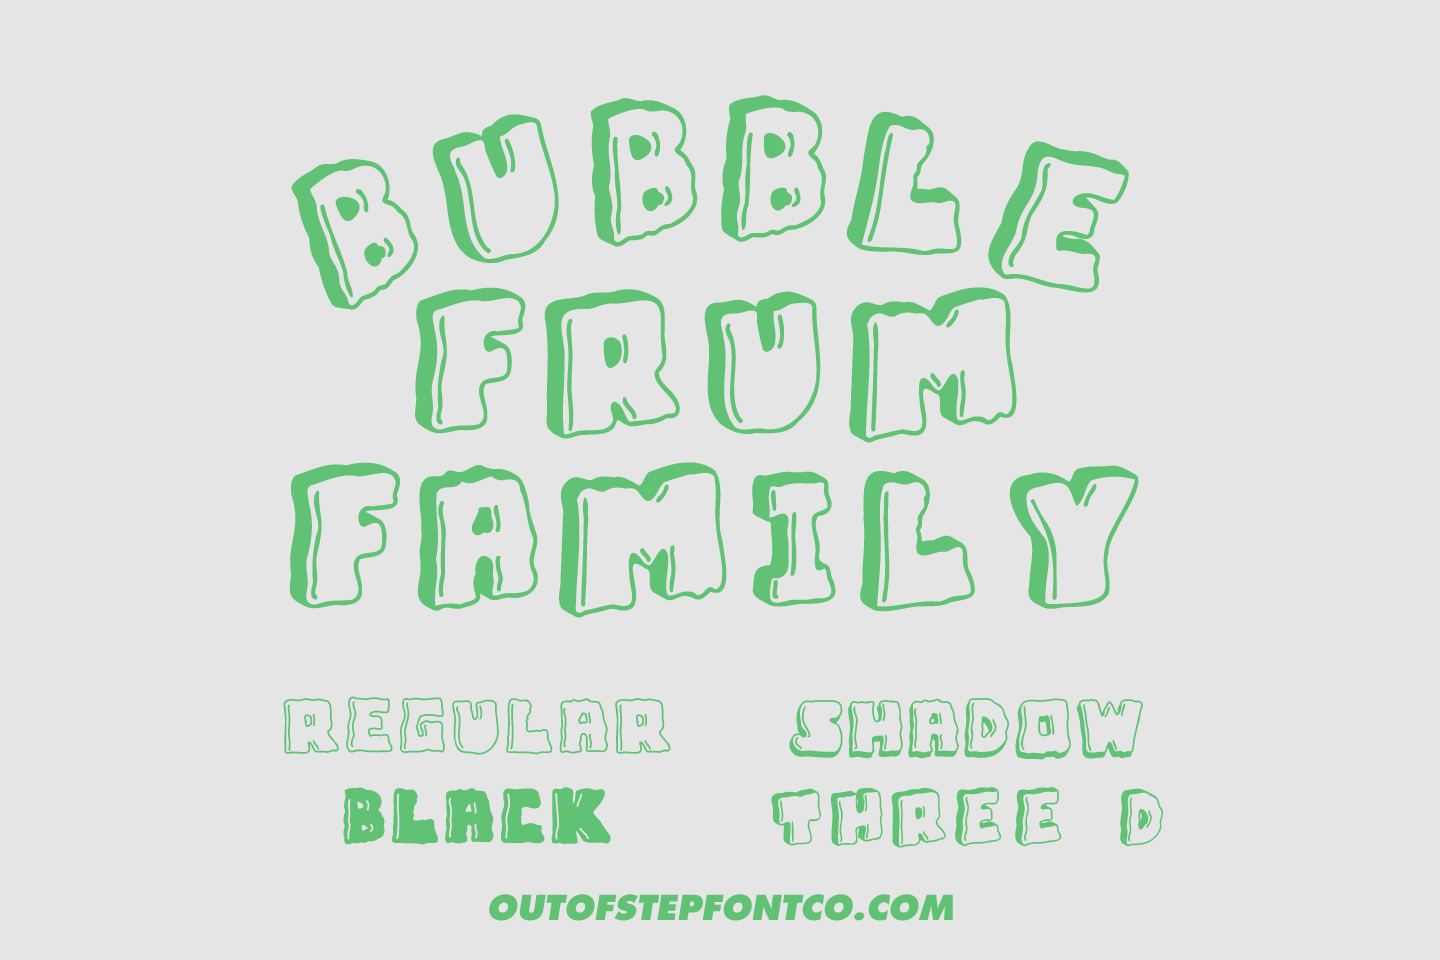 Bubble Frum released